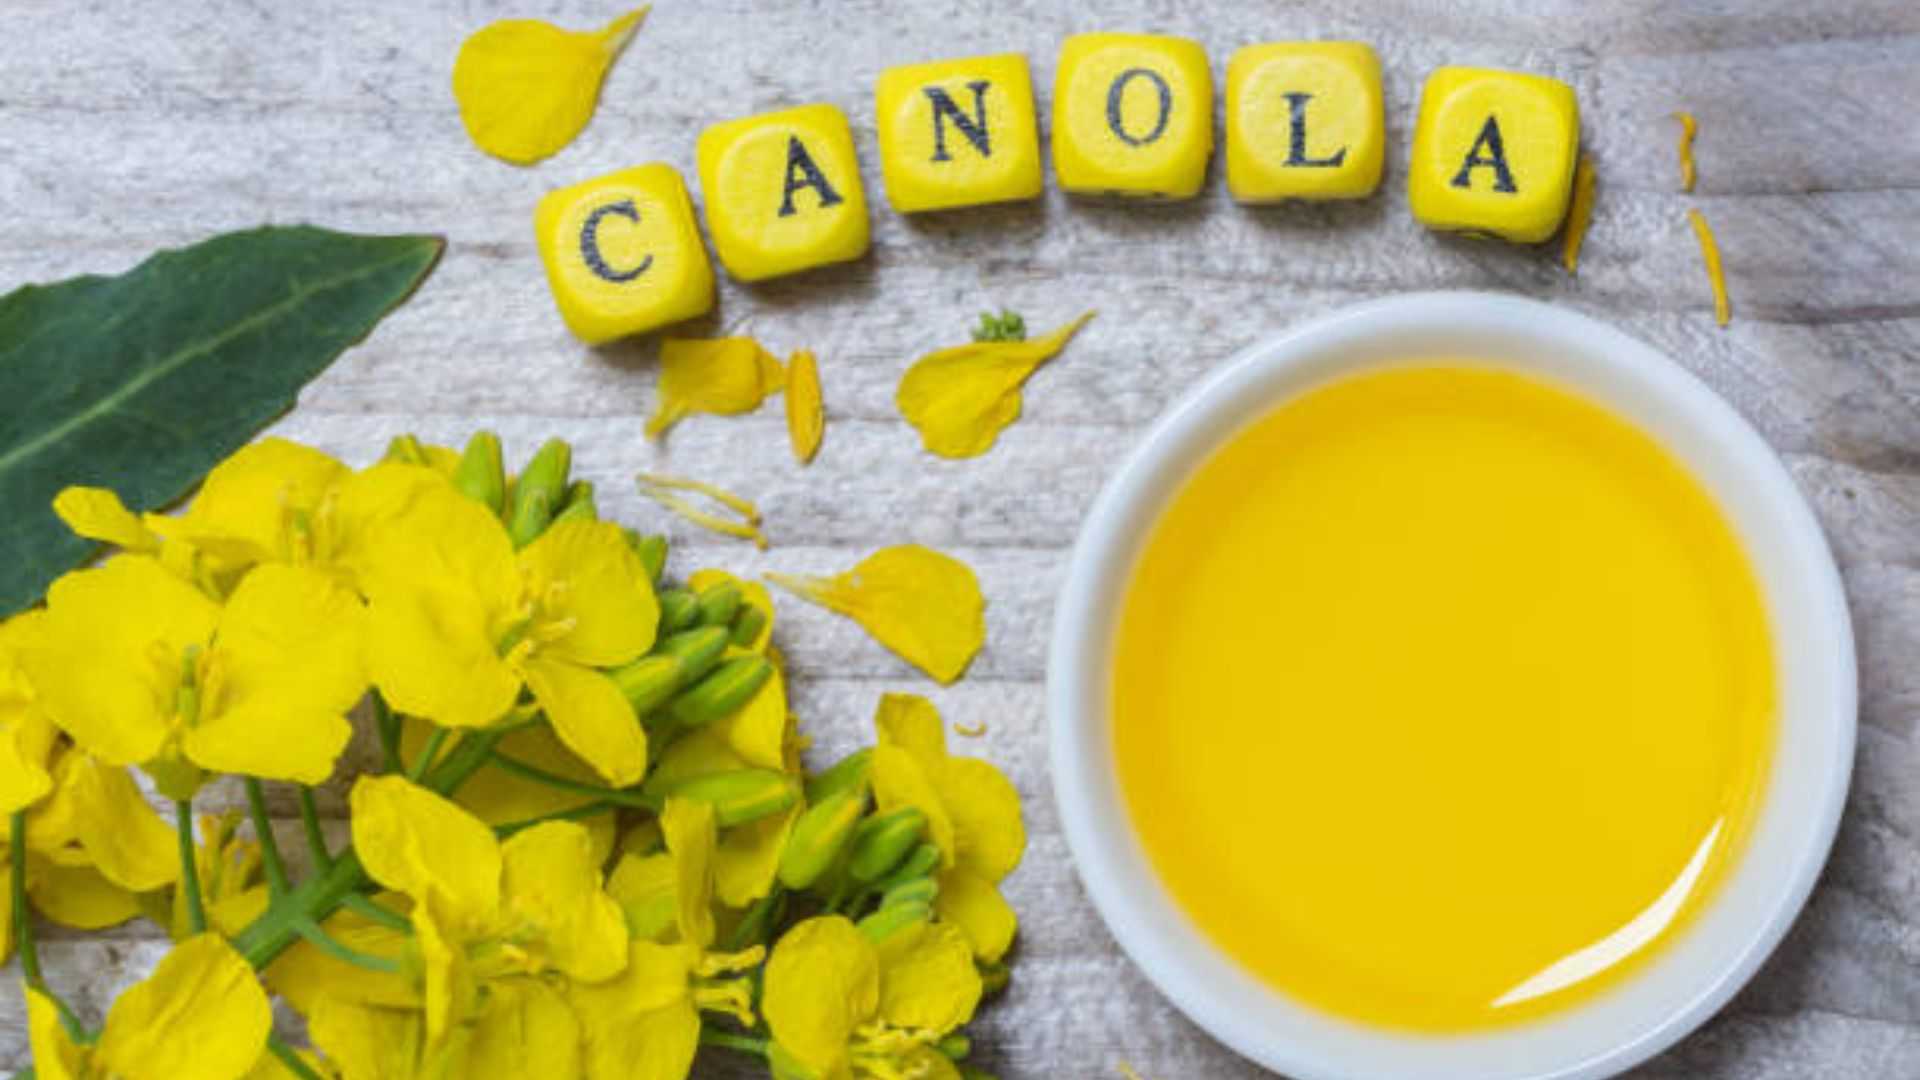 Nutrition of Canola oil